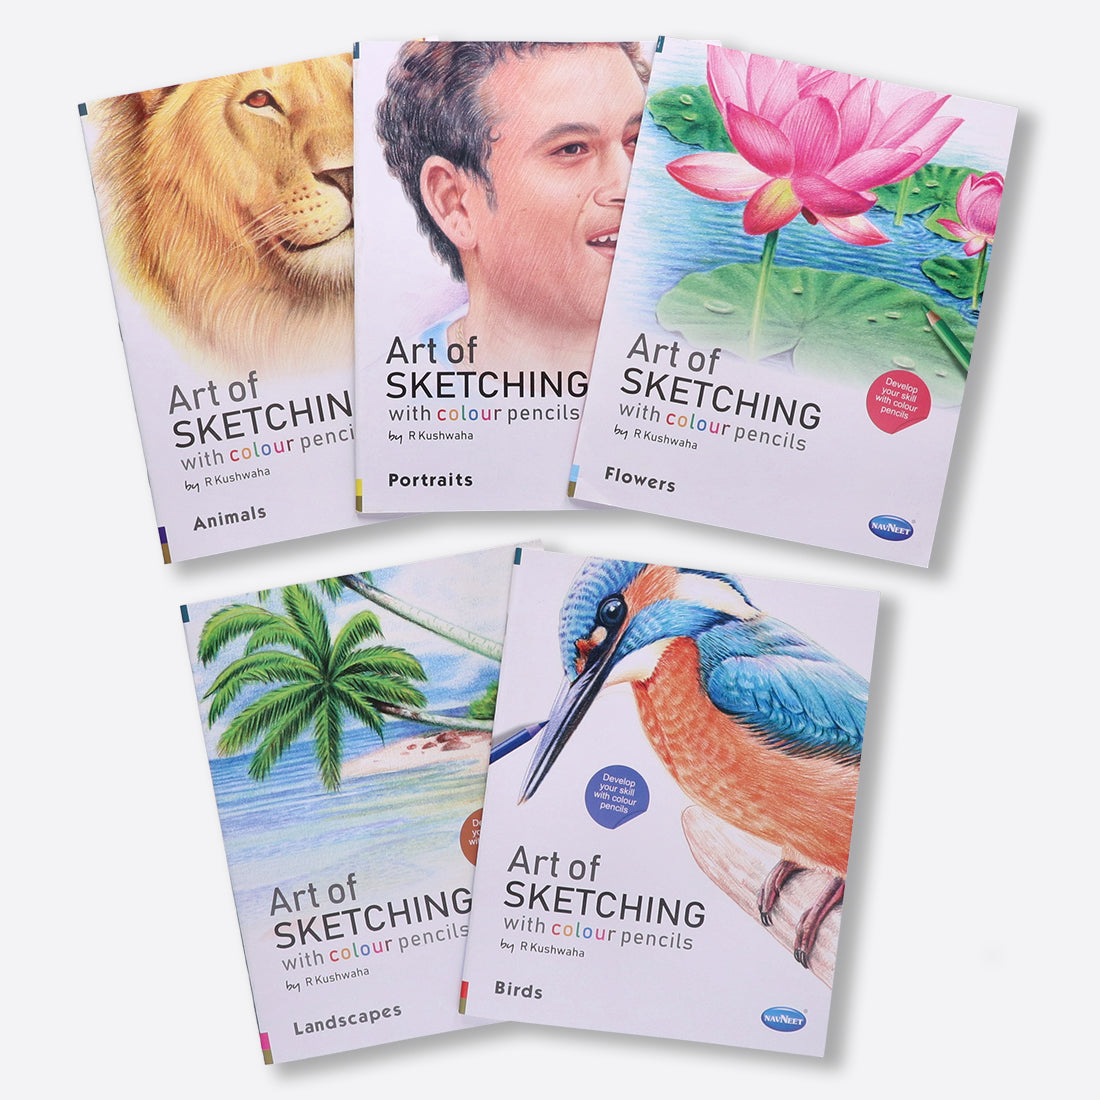 Navneet Art Of Sketching with Colour Pencils Book for Learners- the ultimate guide - Realistic Series - Learn Basic Techniques - Portrait, Flowers, Landscapes, Birds, Animals